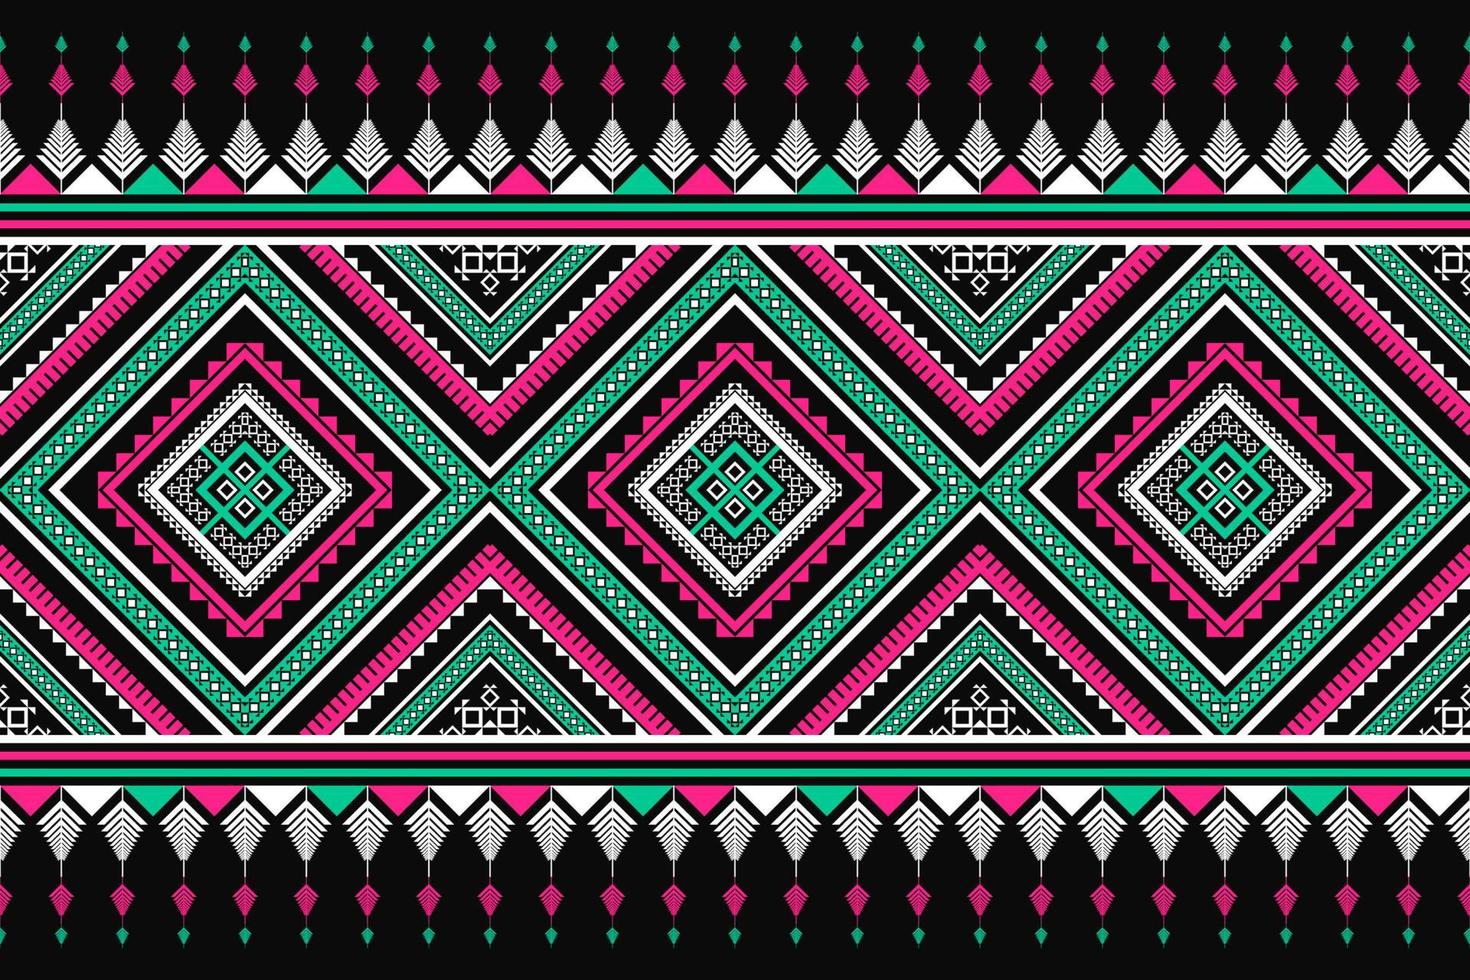 Colorful geometric ethnic seamless pattern traditional. Tribal striped style. Design for background, wallpaper, illustration, textile, fabric, clothing, batik, carpet, embroidery. vector